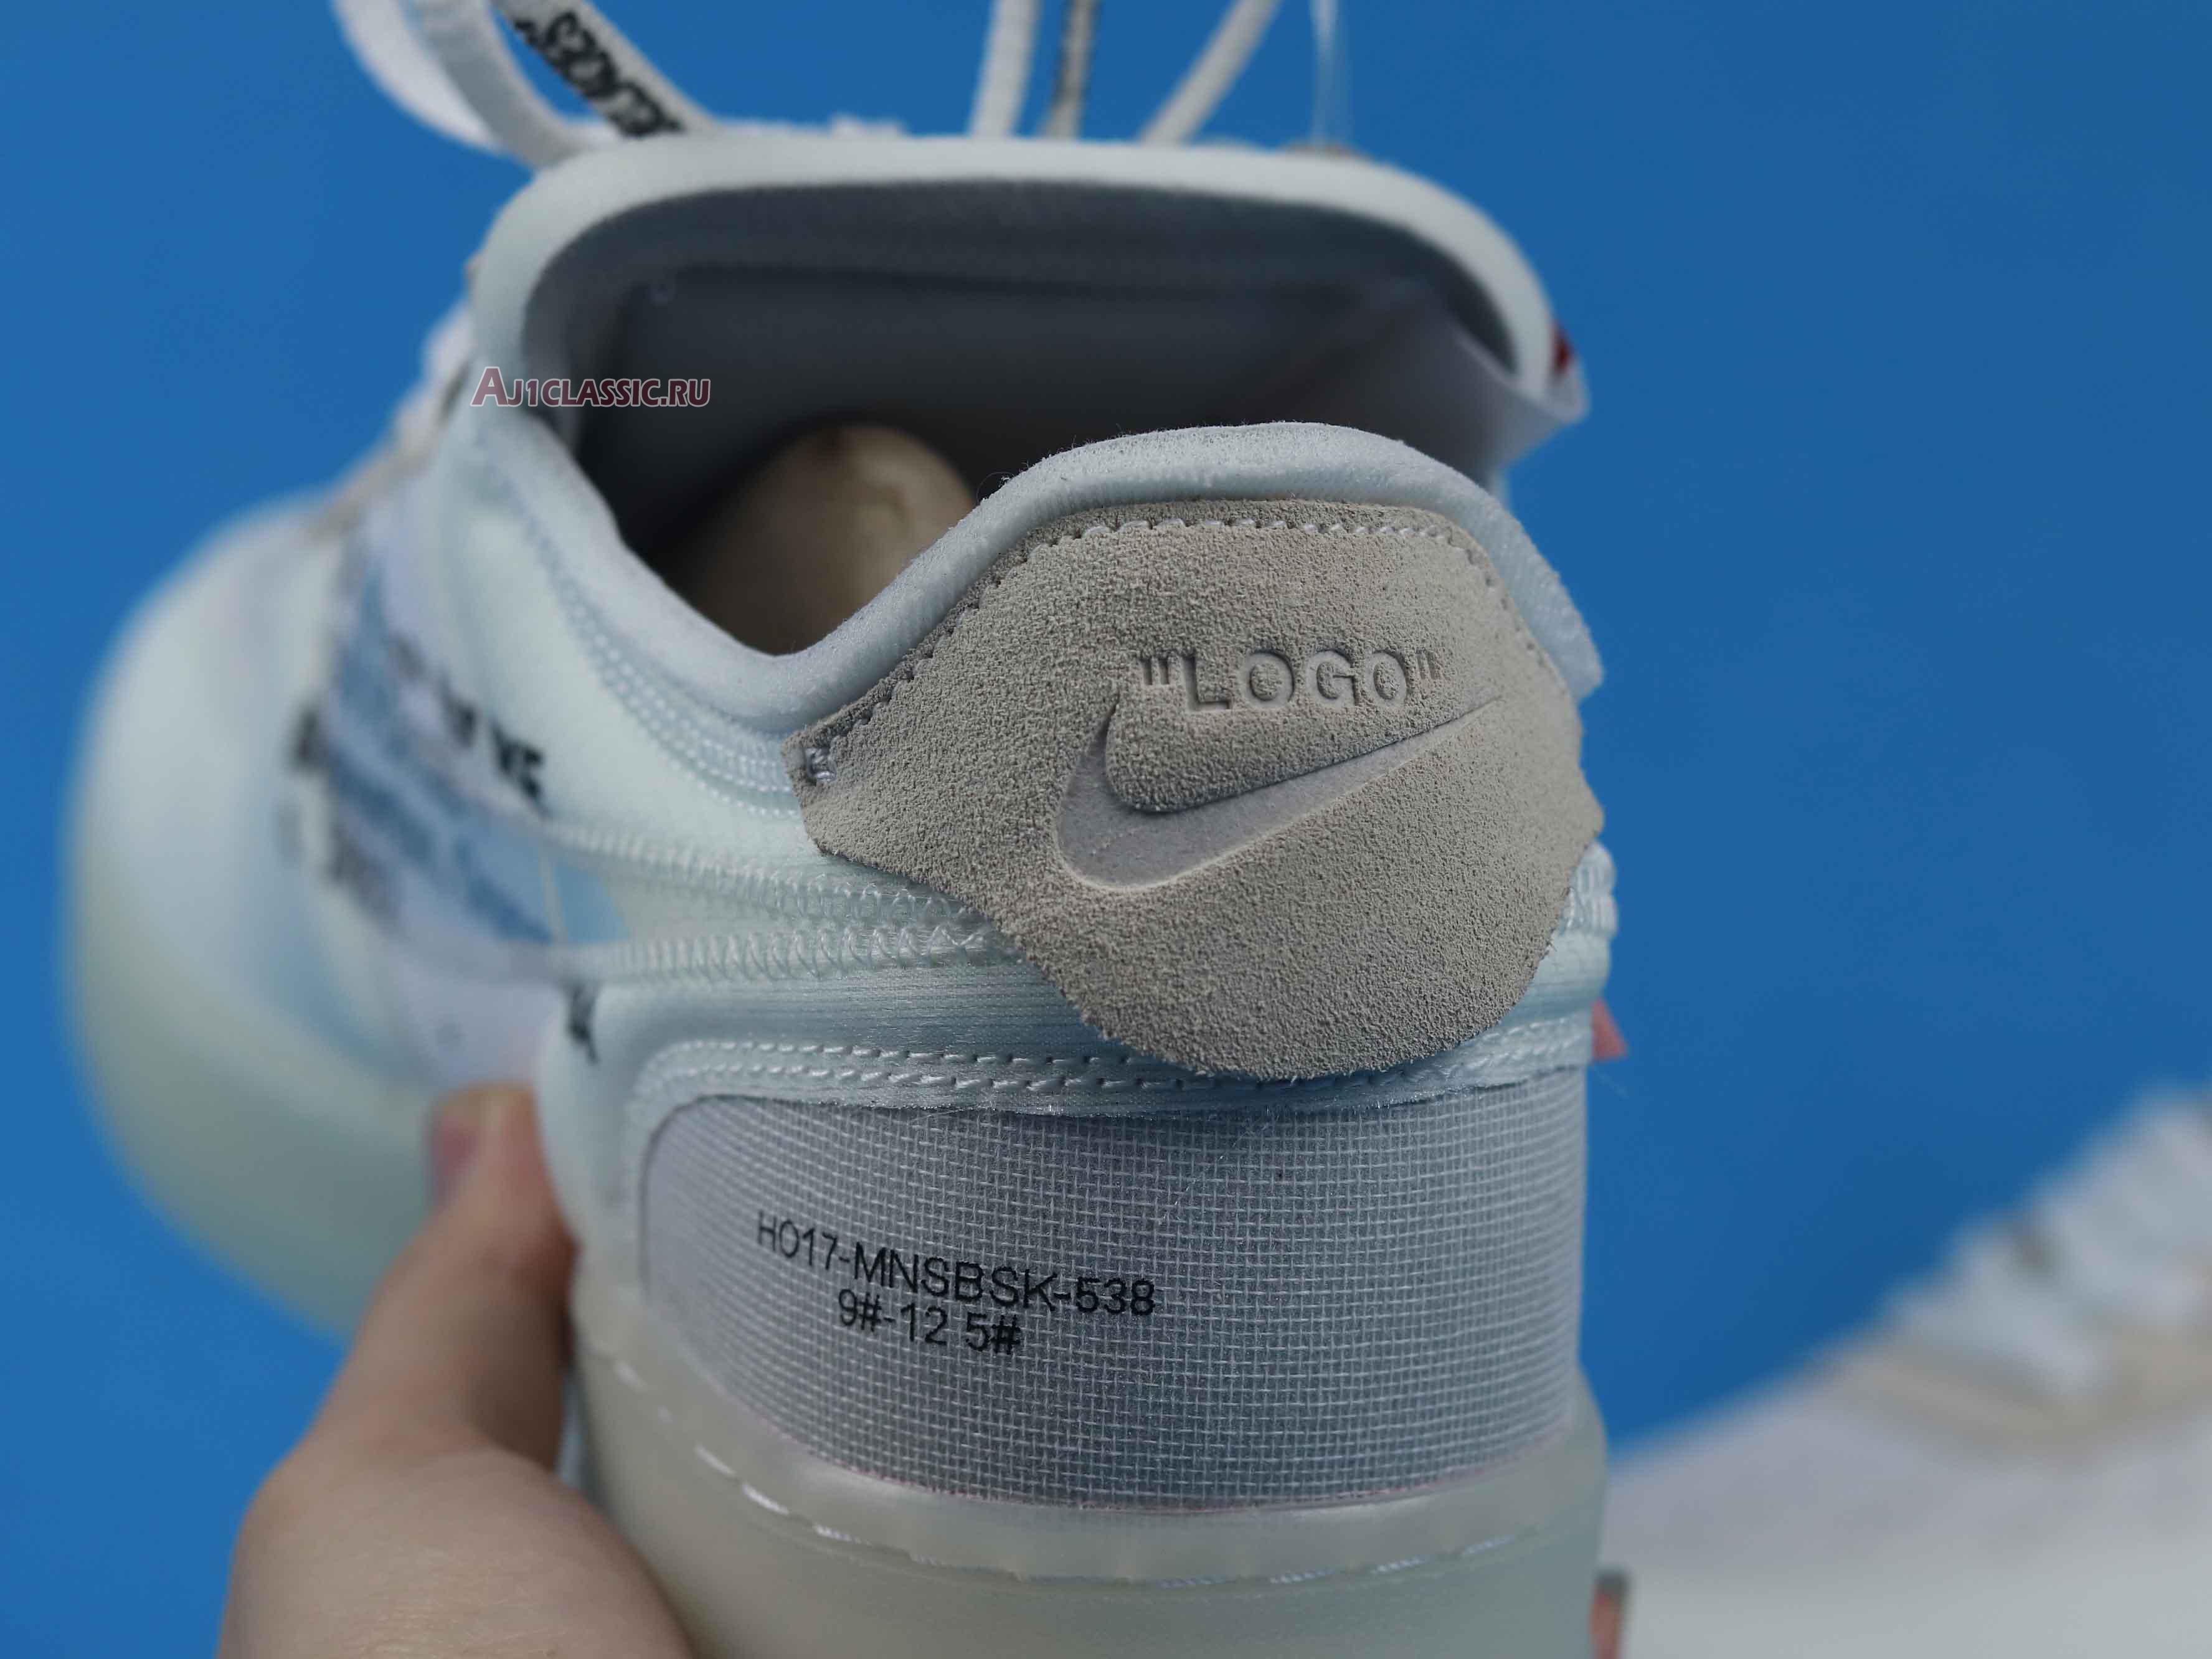 Off-White x Nike Air Force 1 Low "The Ten" AO4606-100